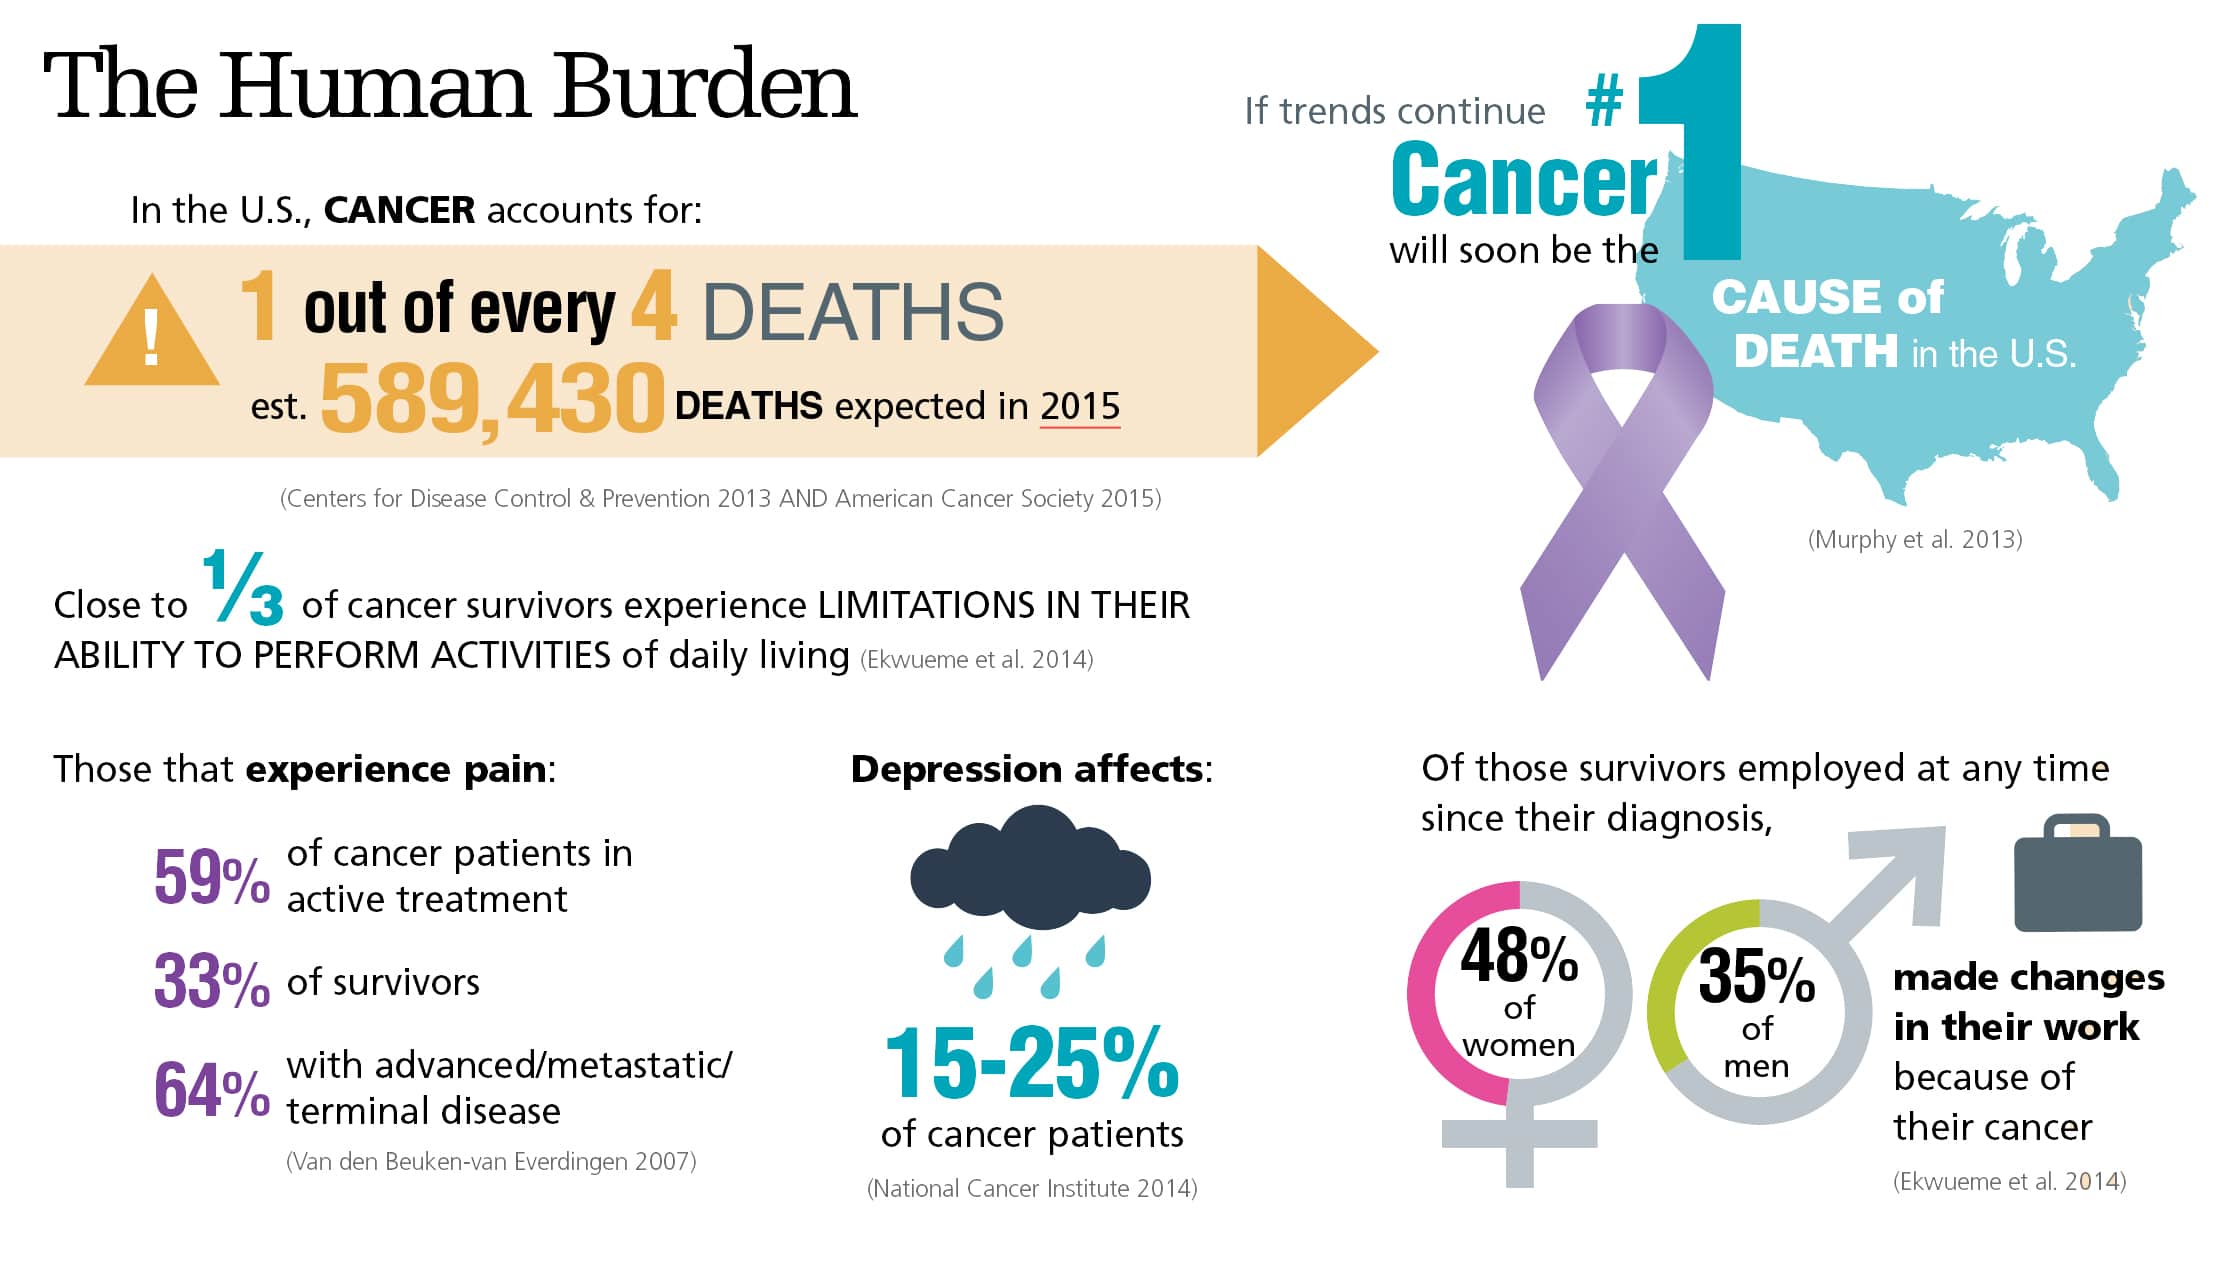 Infographic on the human burden of cancer in the US.